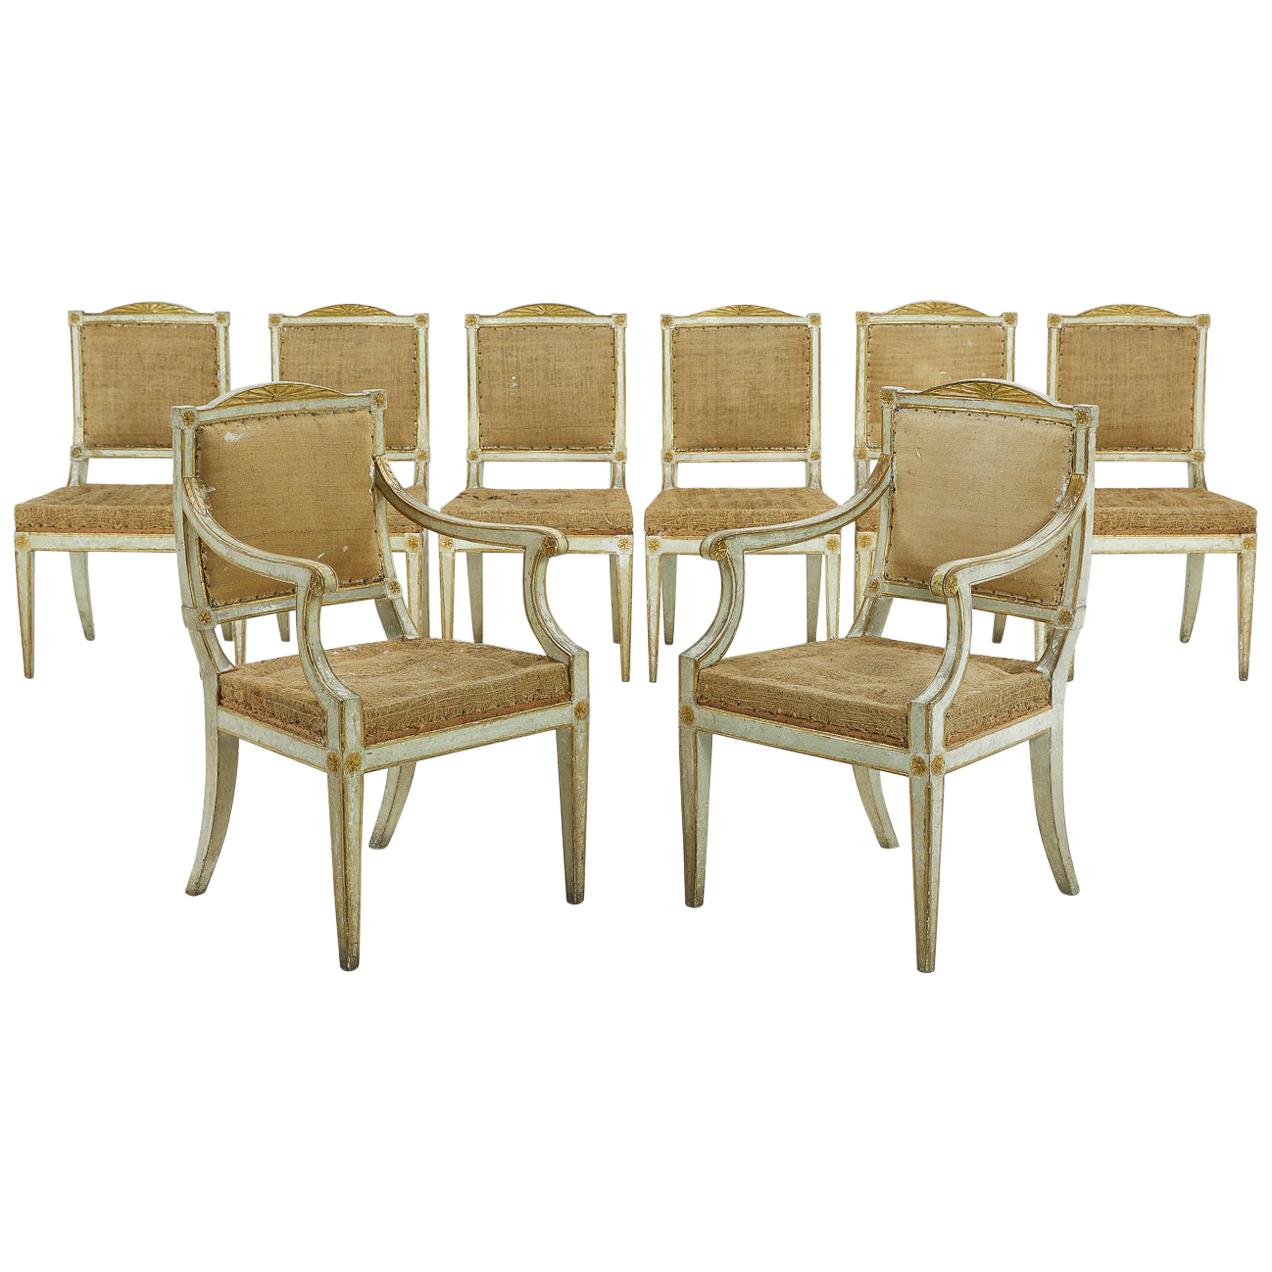 Set of Eight Painted 18th Century Italian Dining Chairs